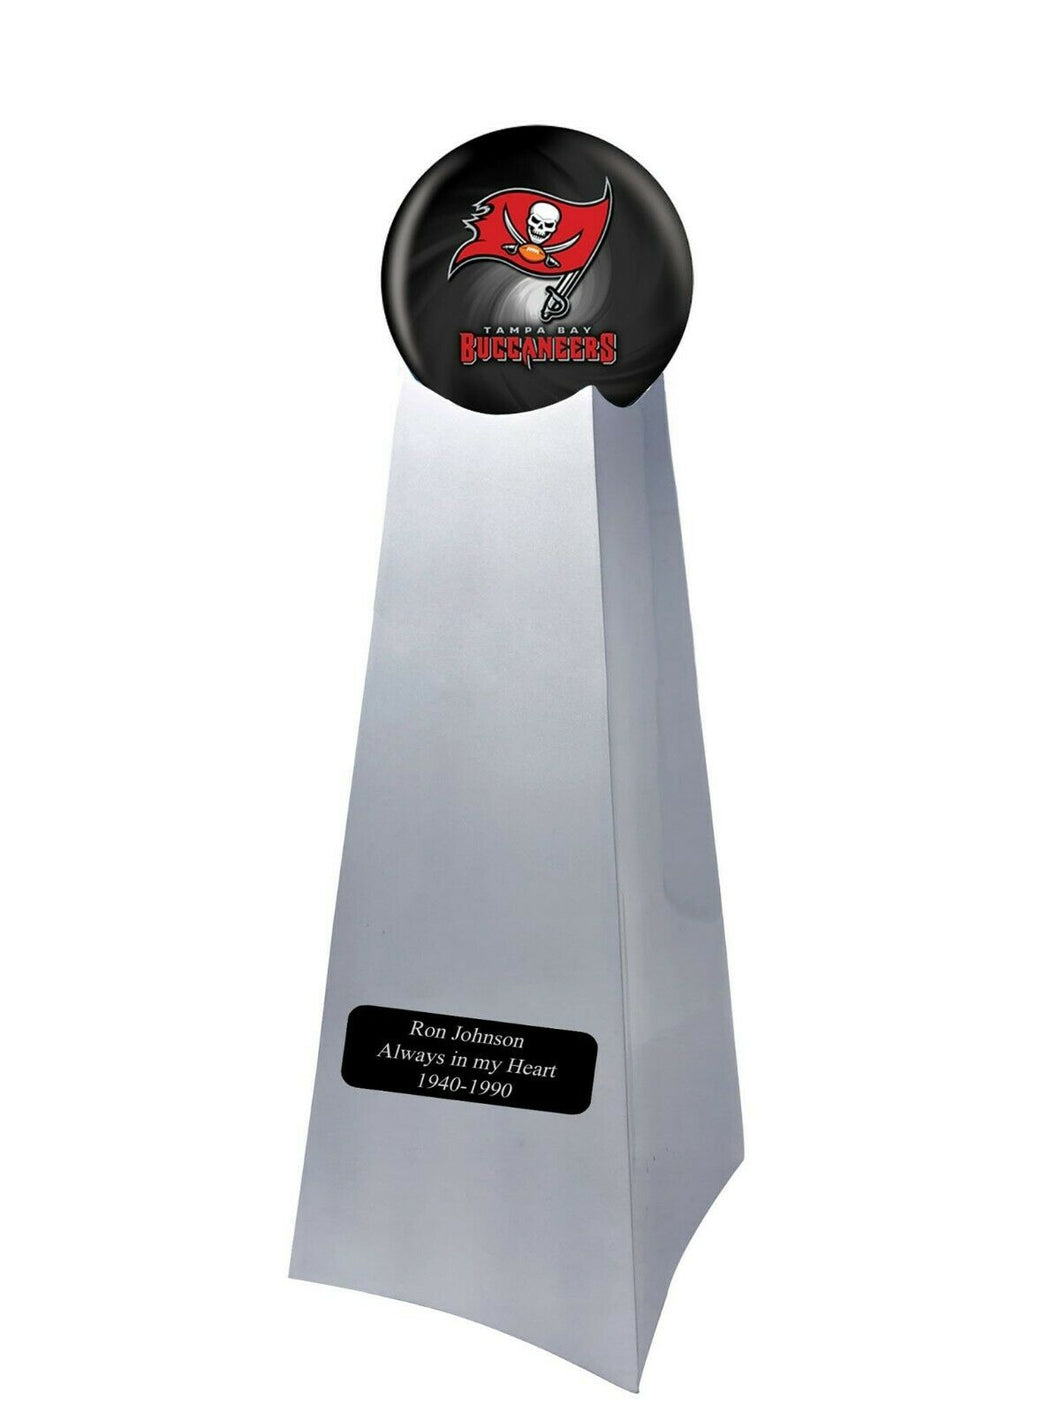 Tampa Bay Buccaneers Football Championship Trophy Large/Adult Cremation Urn 200 Cubic Inches